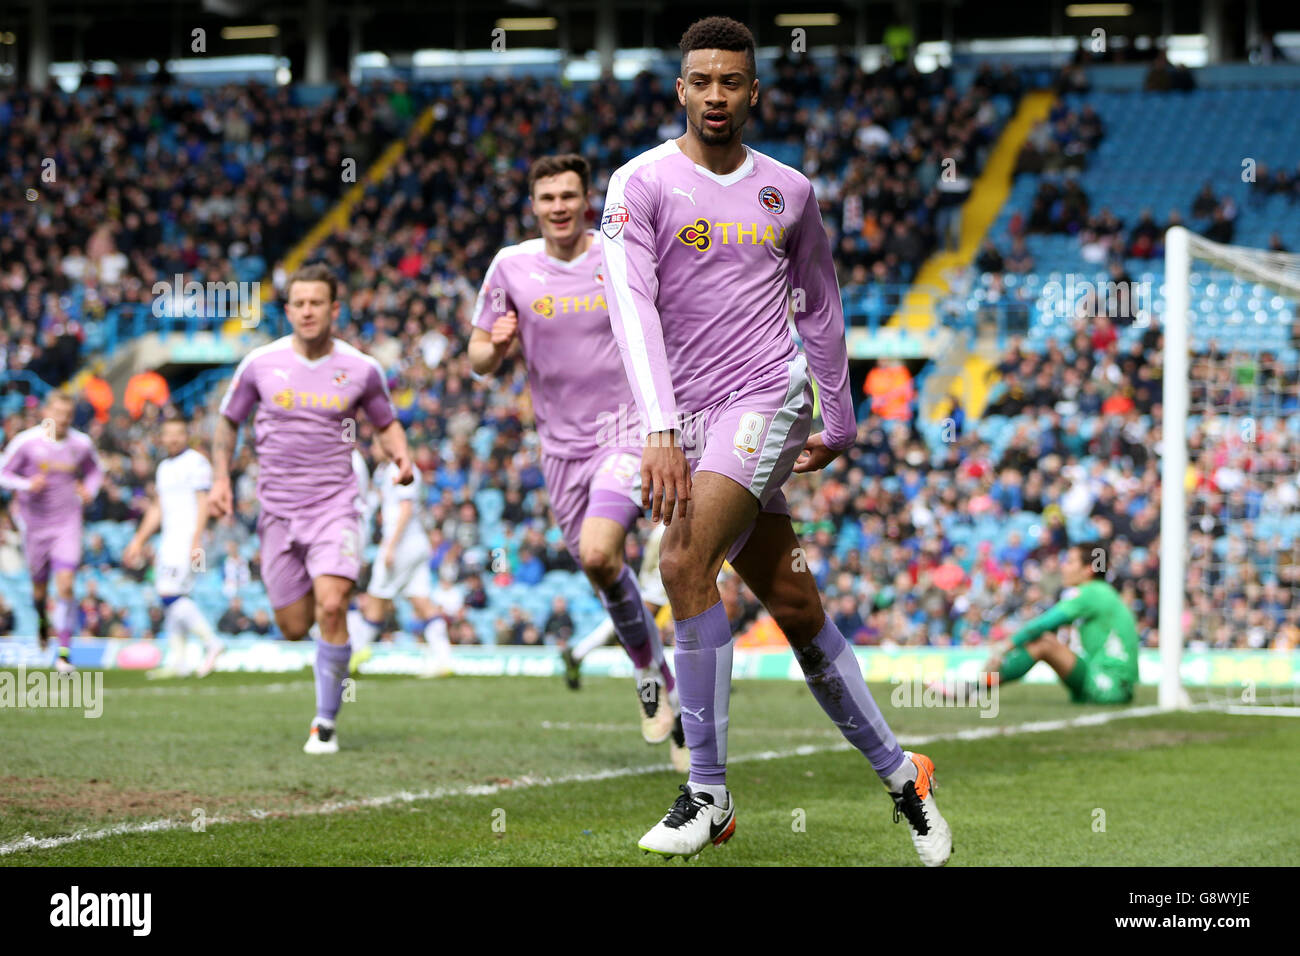 Leeds United v Reading - Sky Bet Championship - Elland Road. Reading's Michael Hector celebrates scoring his side's first goal of the game Stock Photo